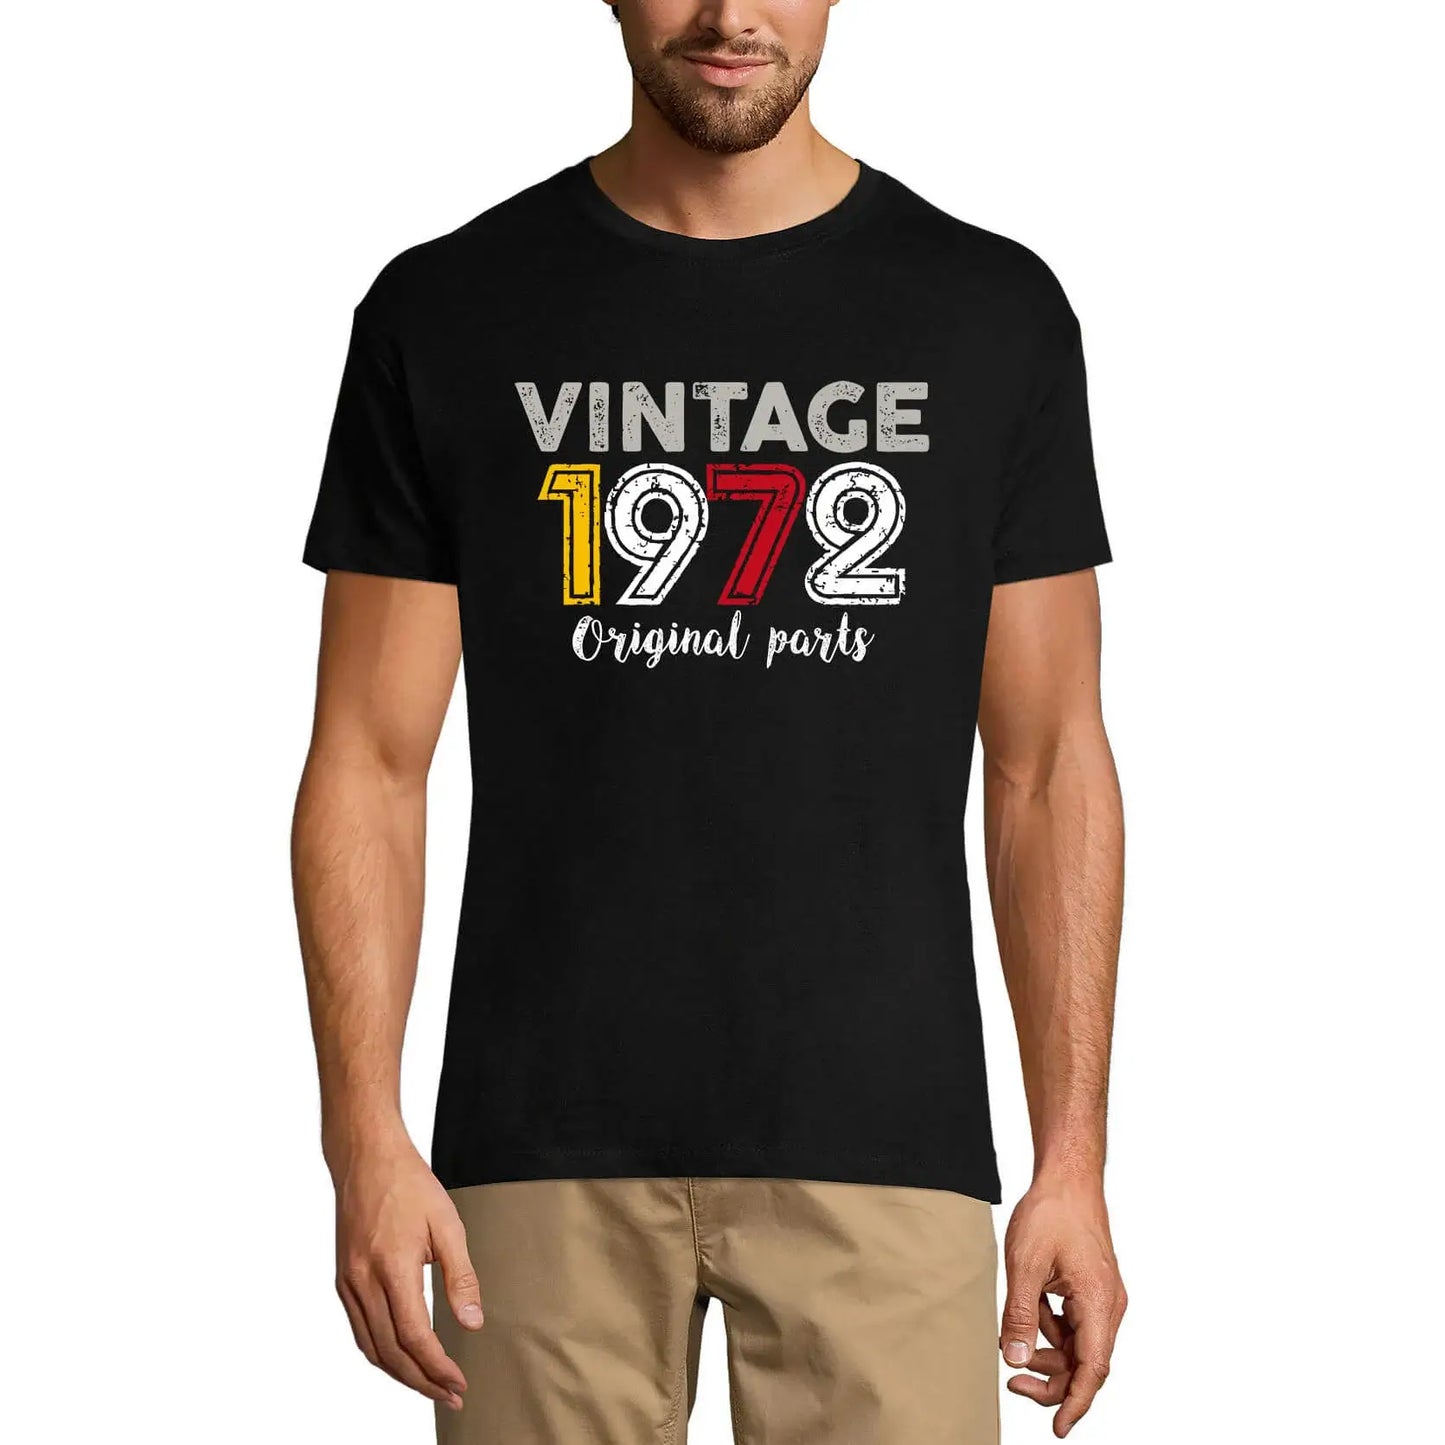 Men's Graphic T-Shirt Original Parts 1972 52nd Birthday Anniversary 52 Year Old Gift 1972 Vintage Eco-Friendly Short Sleeve Novelty Tee